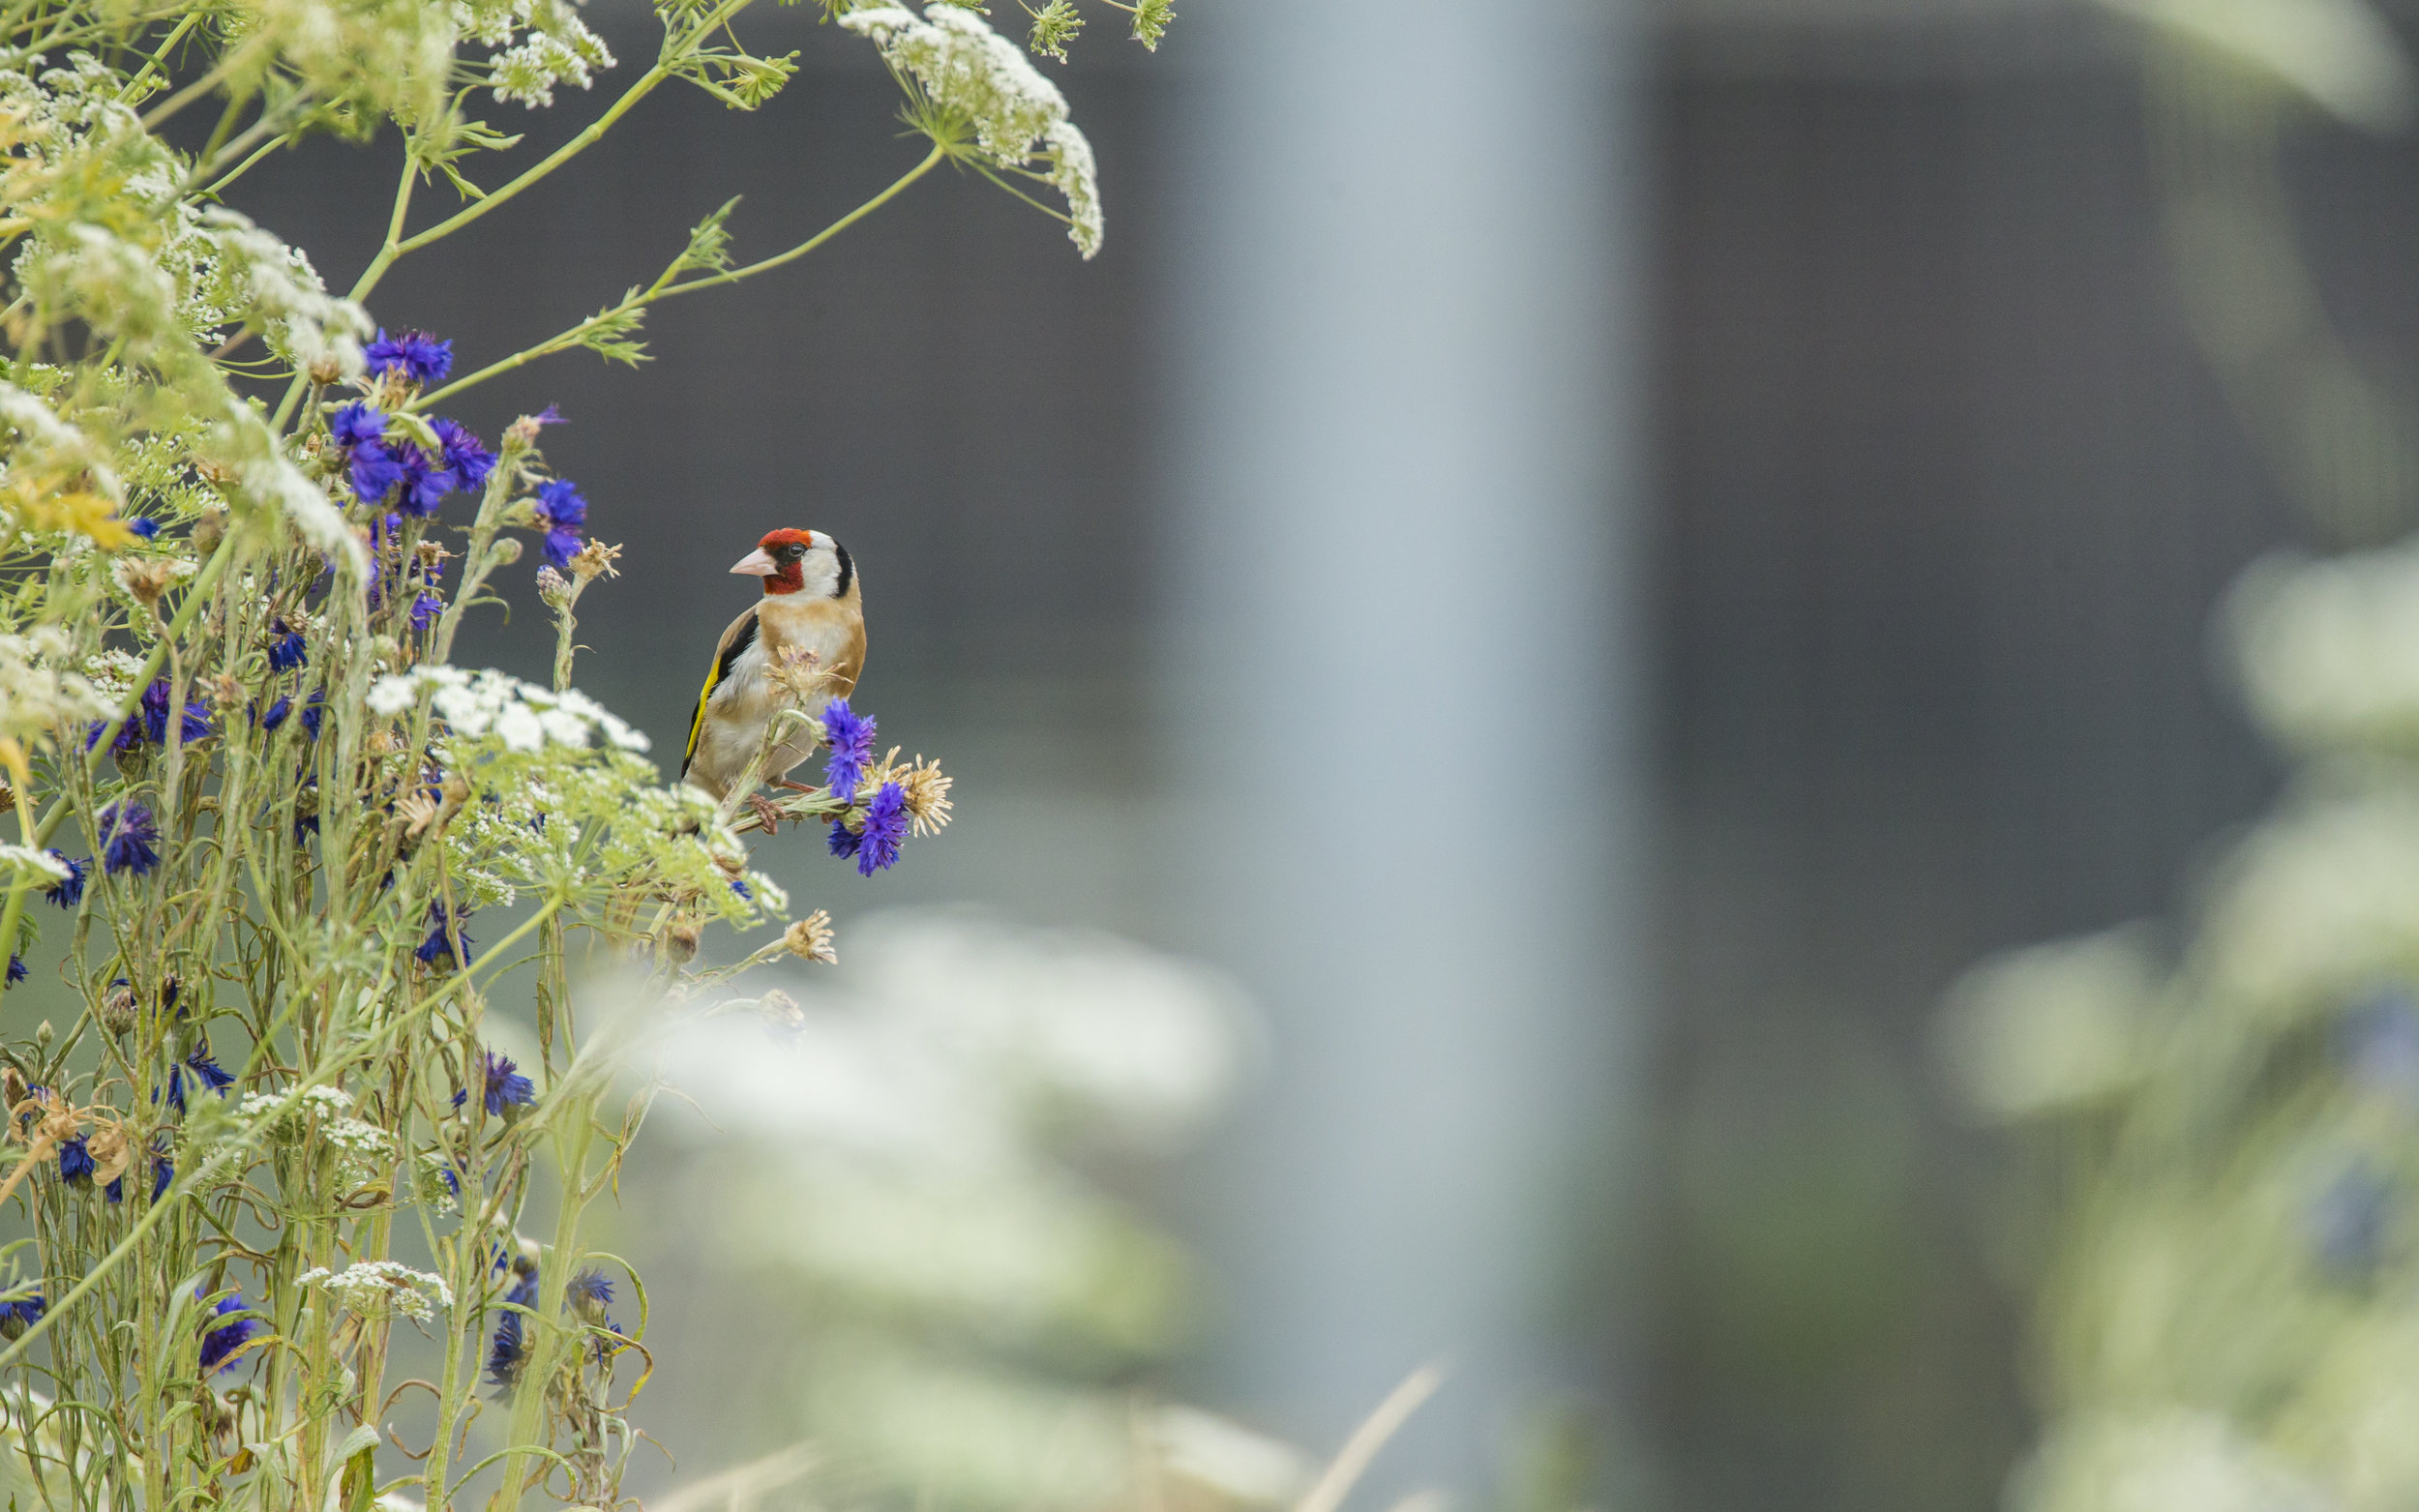  A goldfinch in London's Olympic park. 